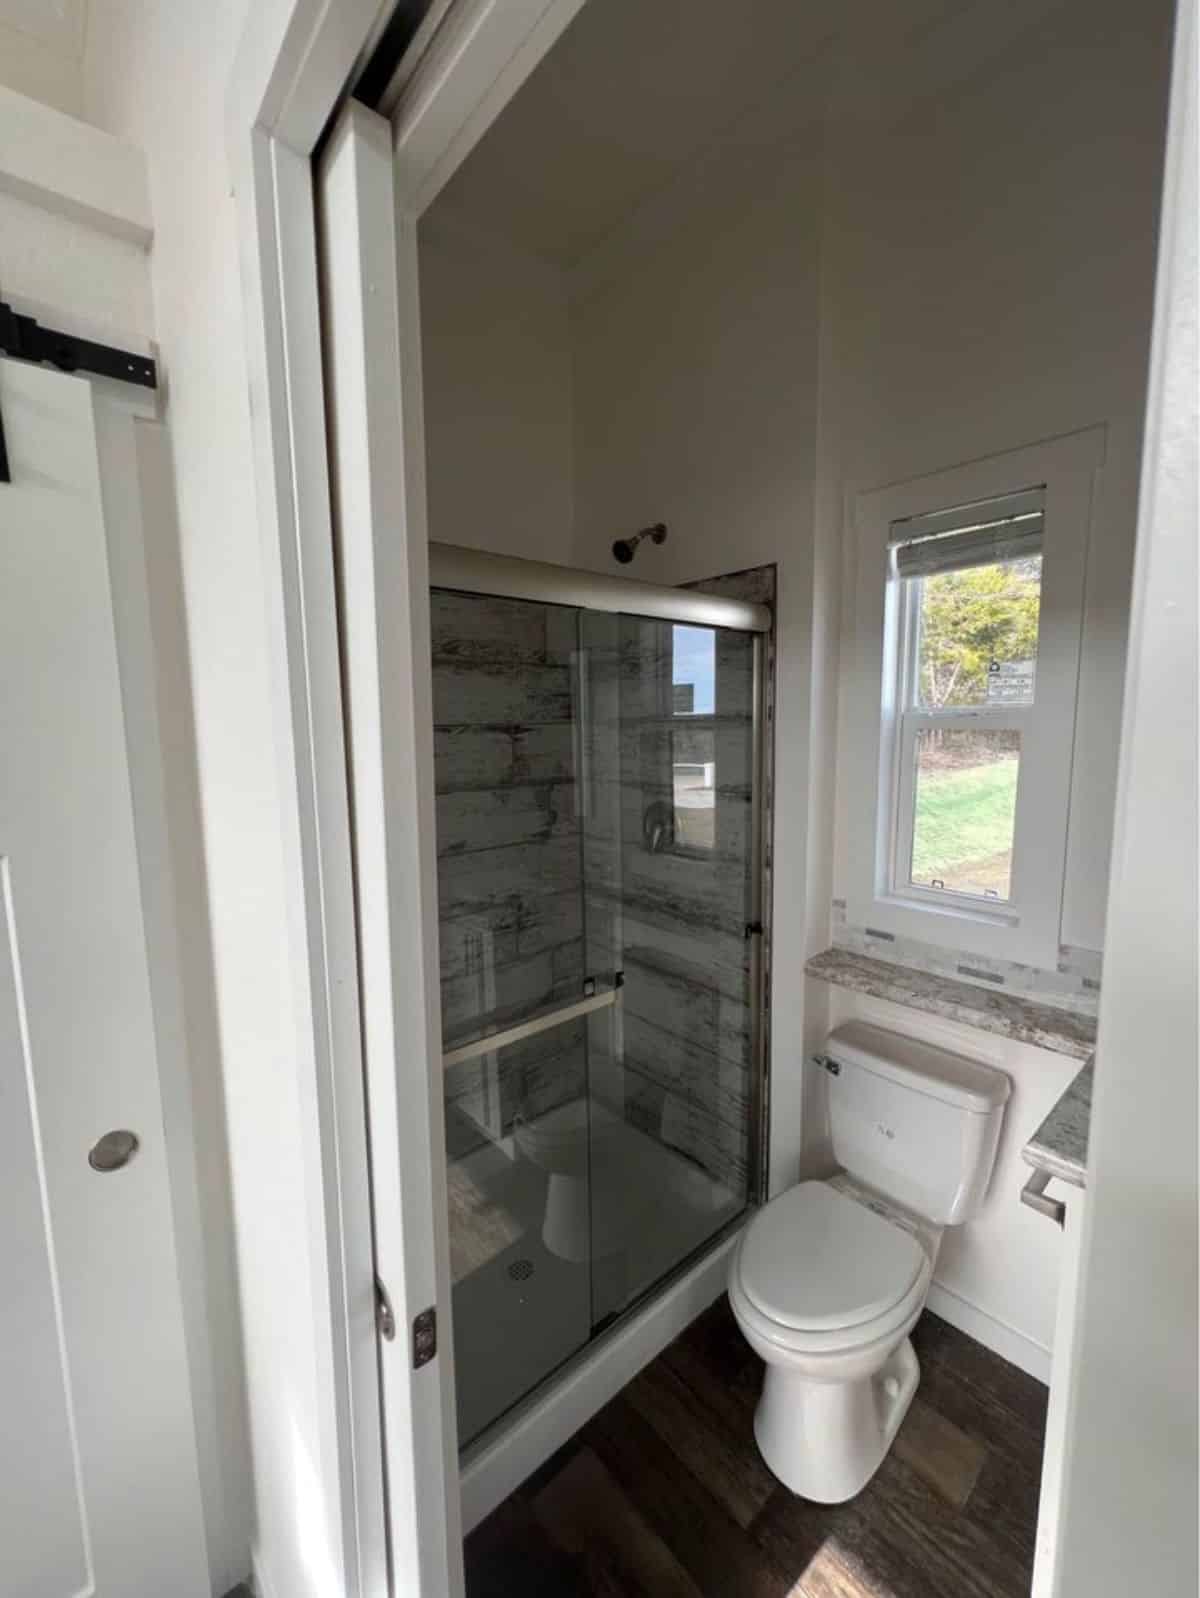 standard toilet and separate shower area in bathroom of tiny house with a porch